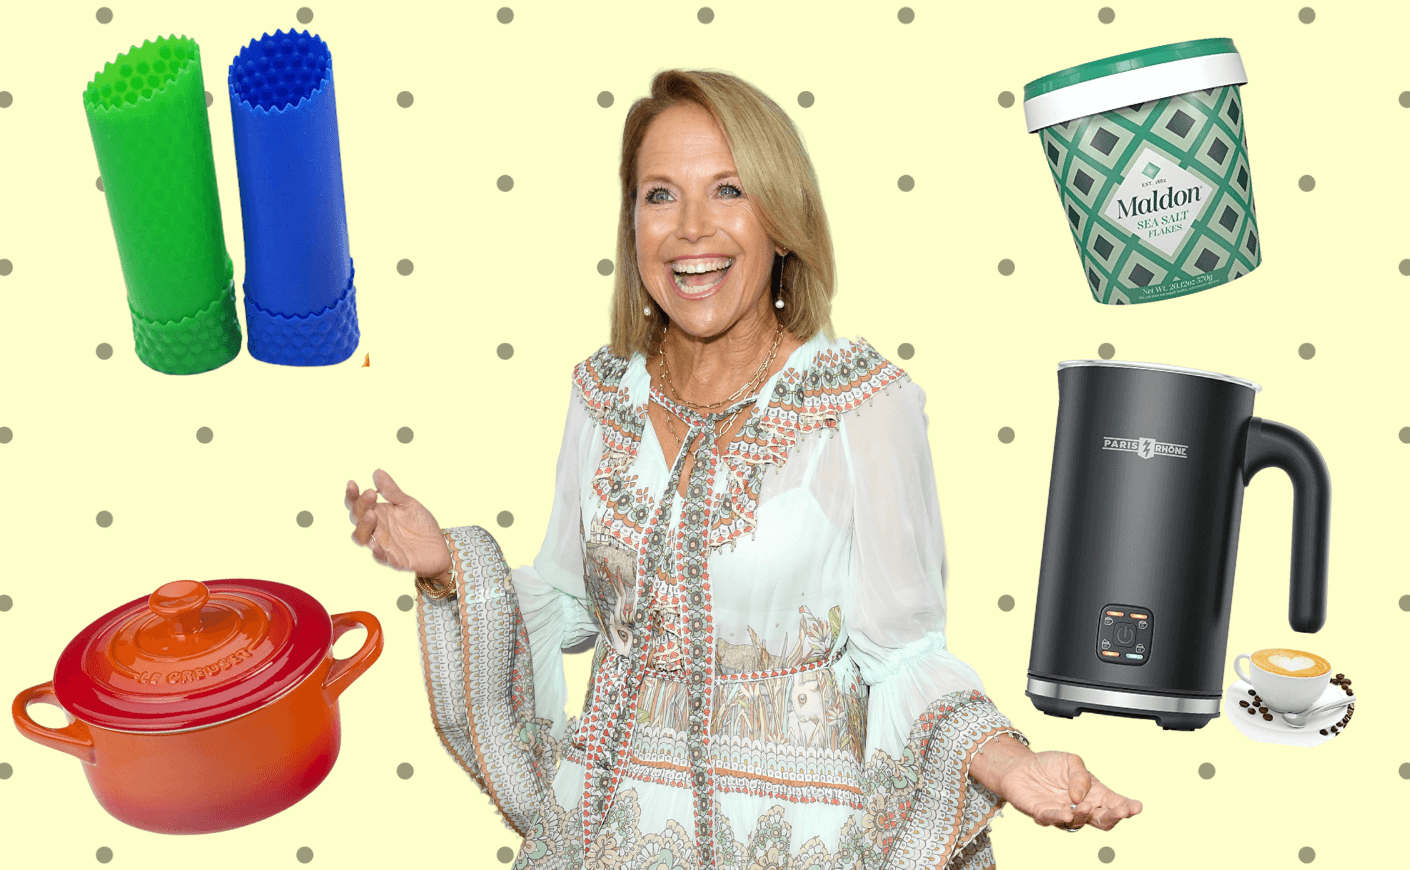 Katie Couric surrounded by some of her favorite cooking tools